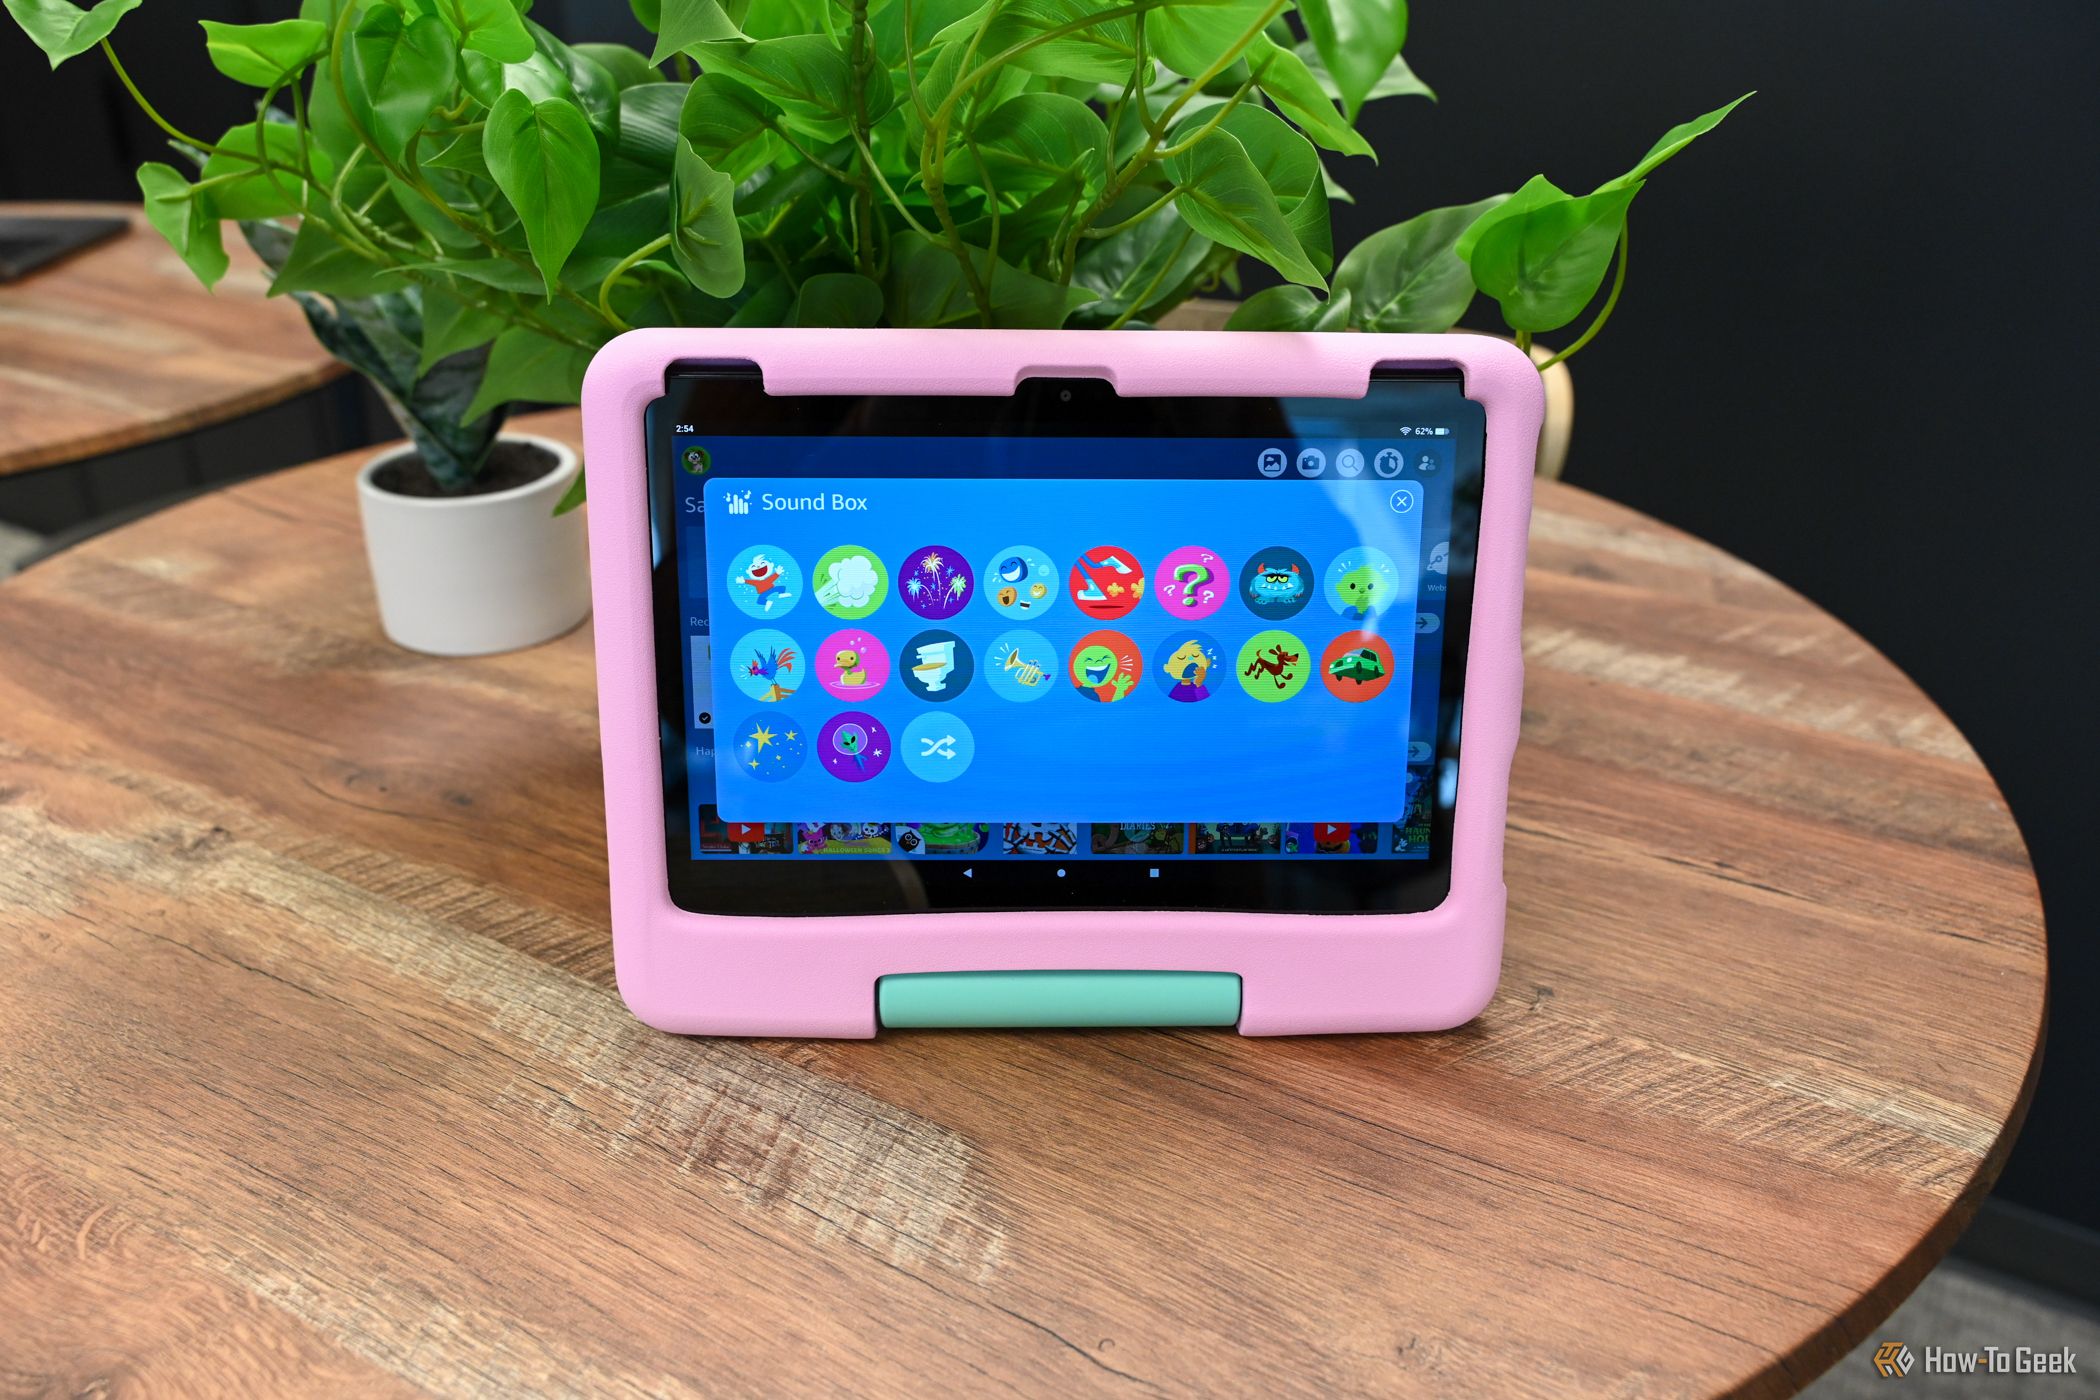 sound box effects on the amazon fire hd 10 kids tablet